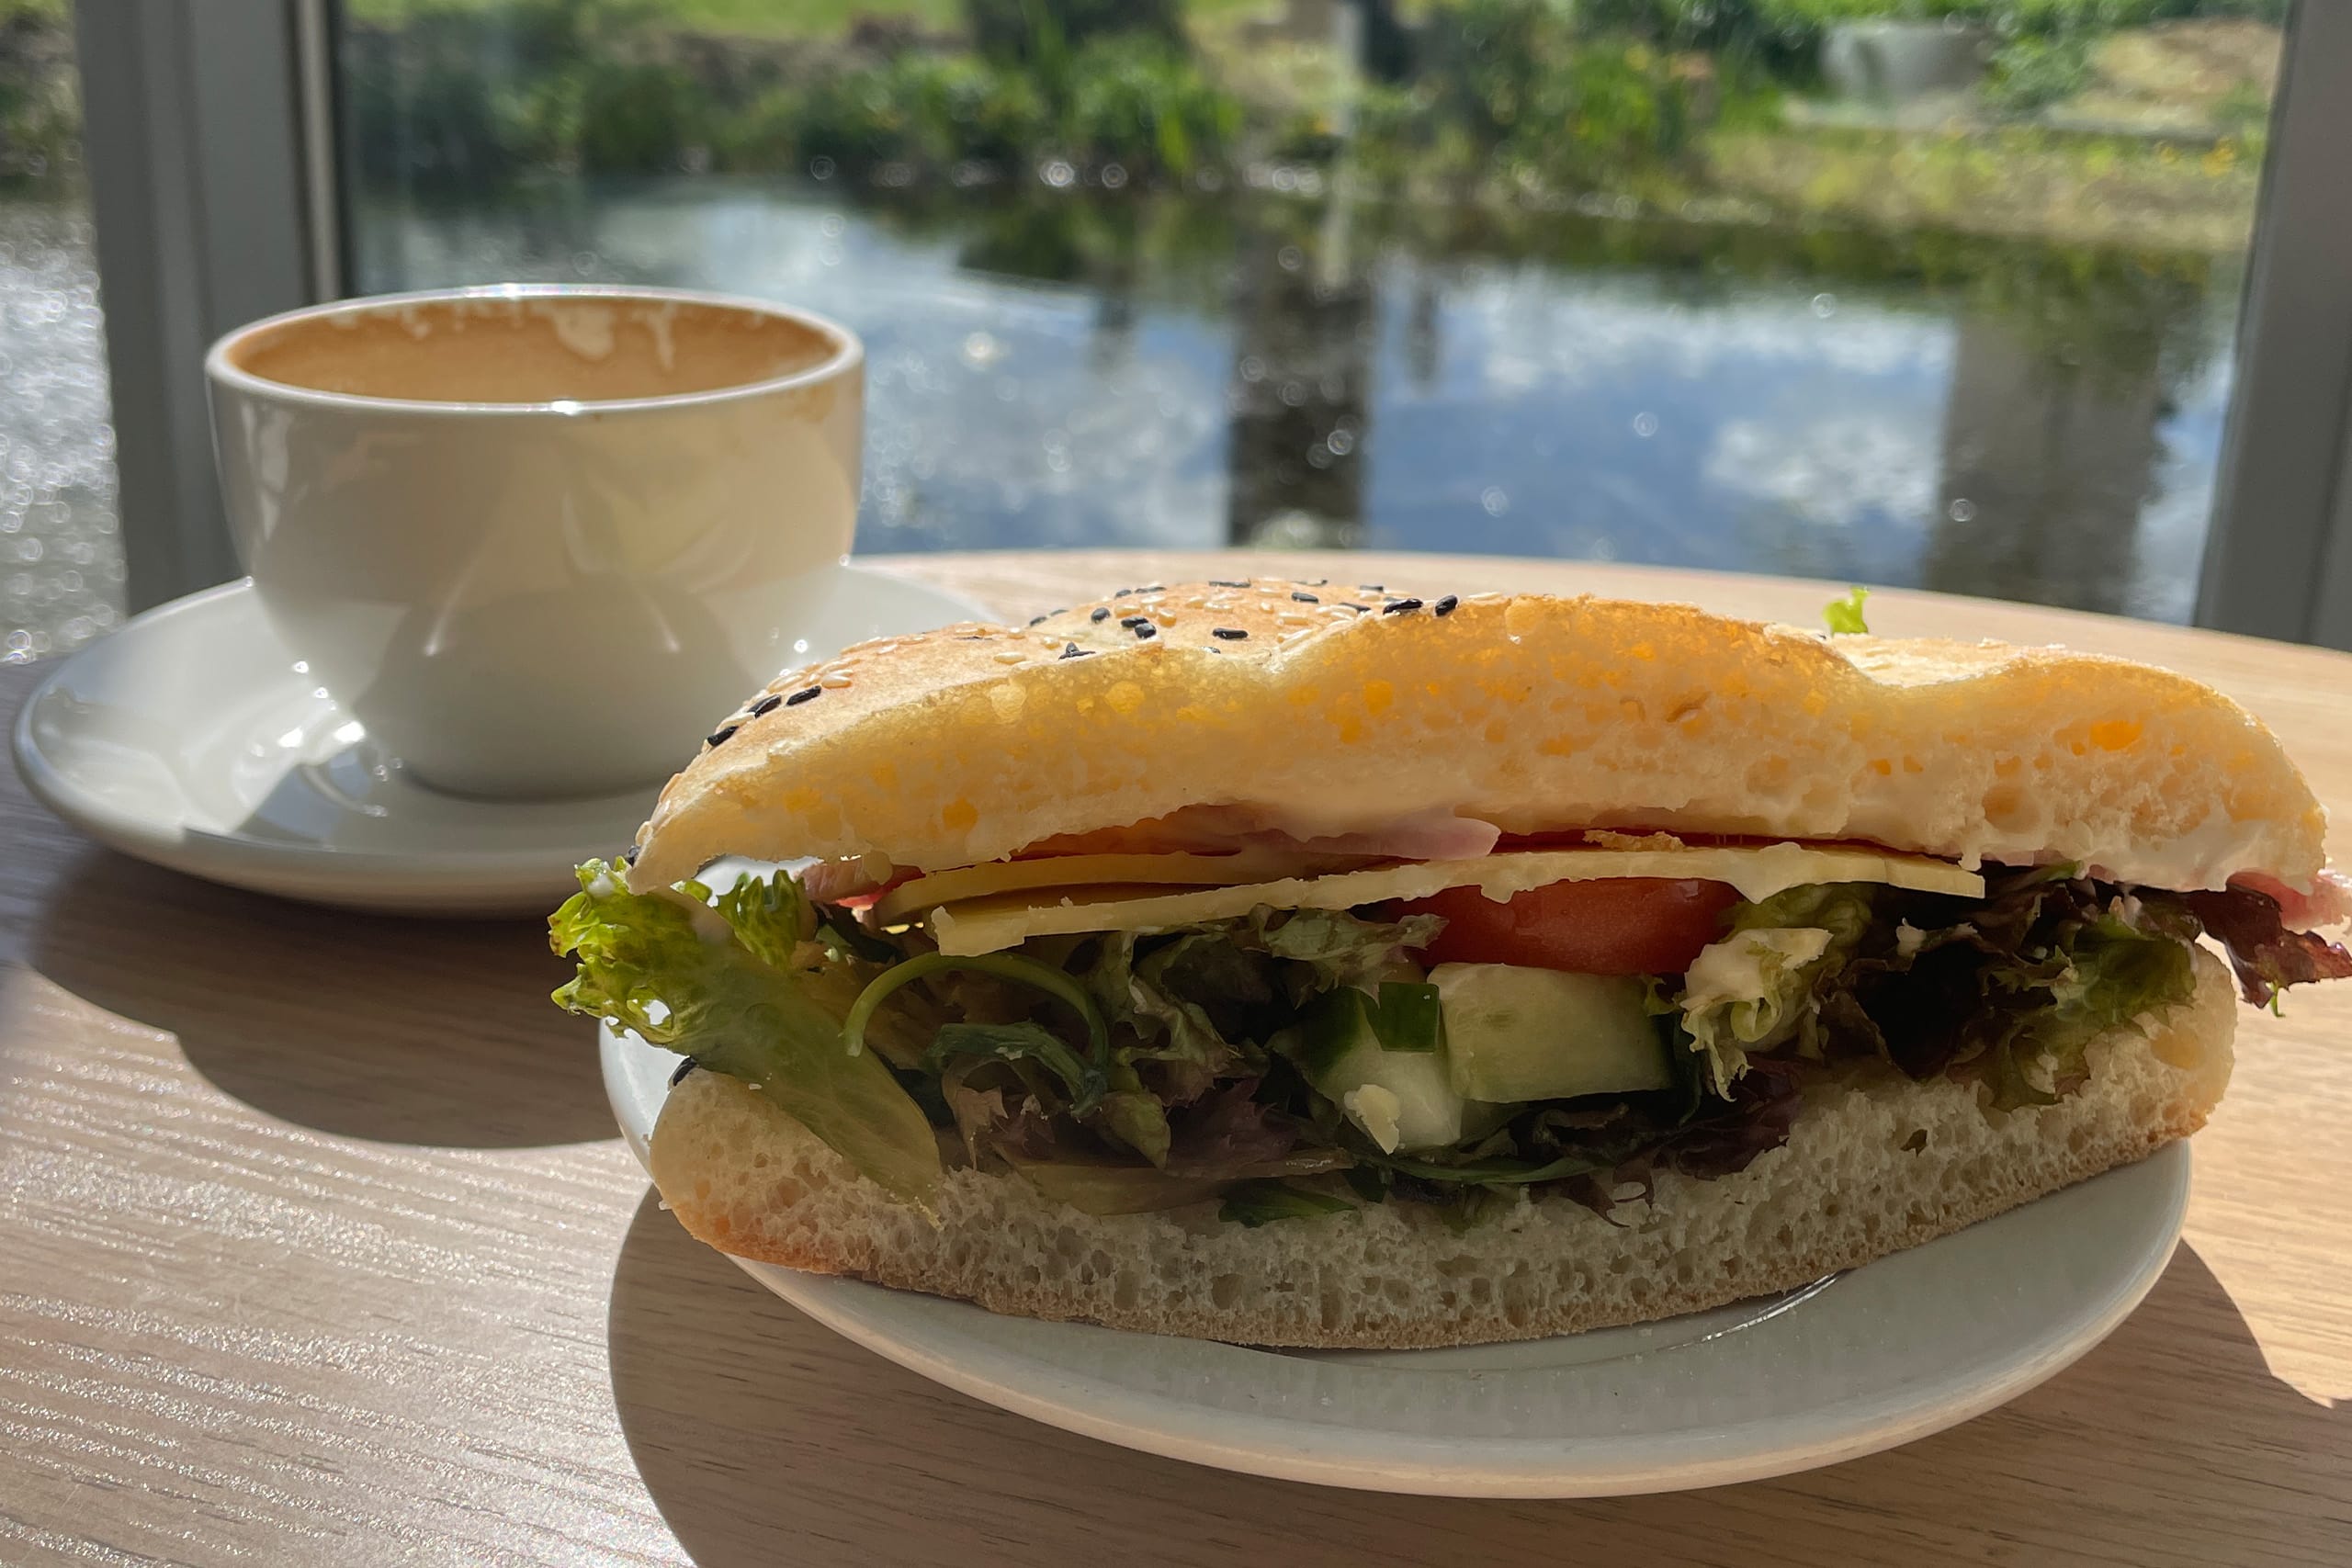 A plated cheese and salad sandwich sits on a table with a water feature in the background.